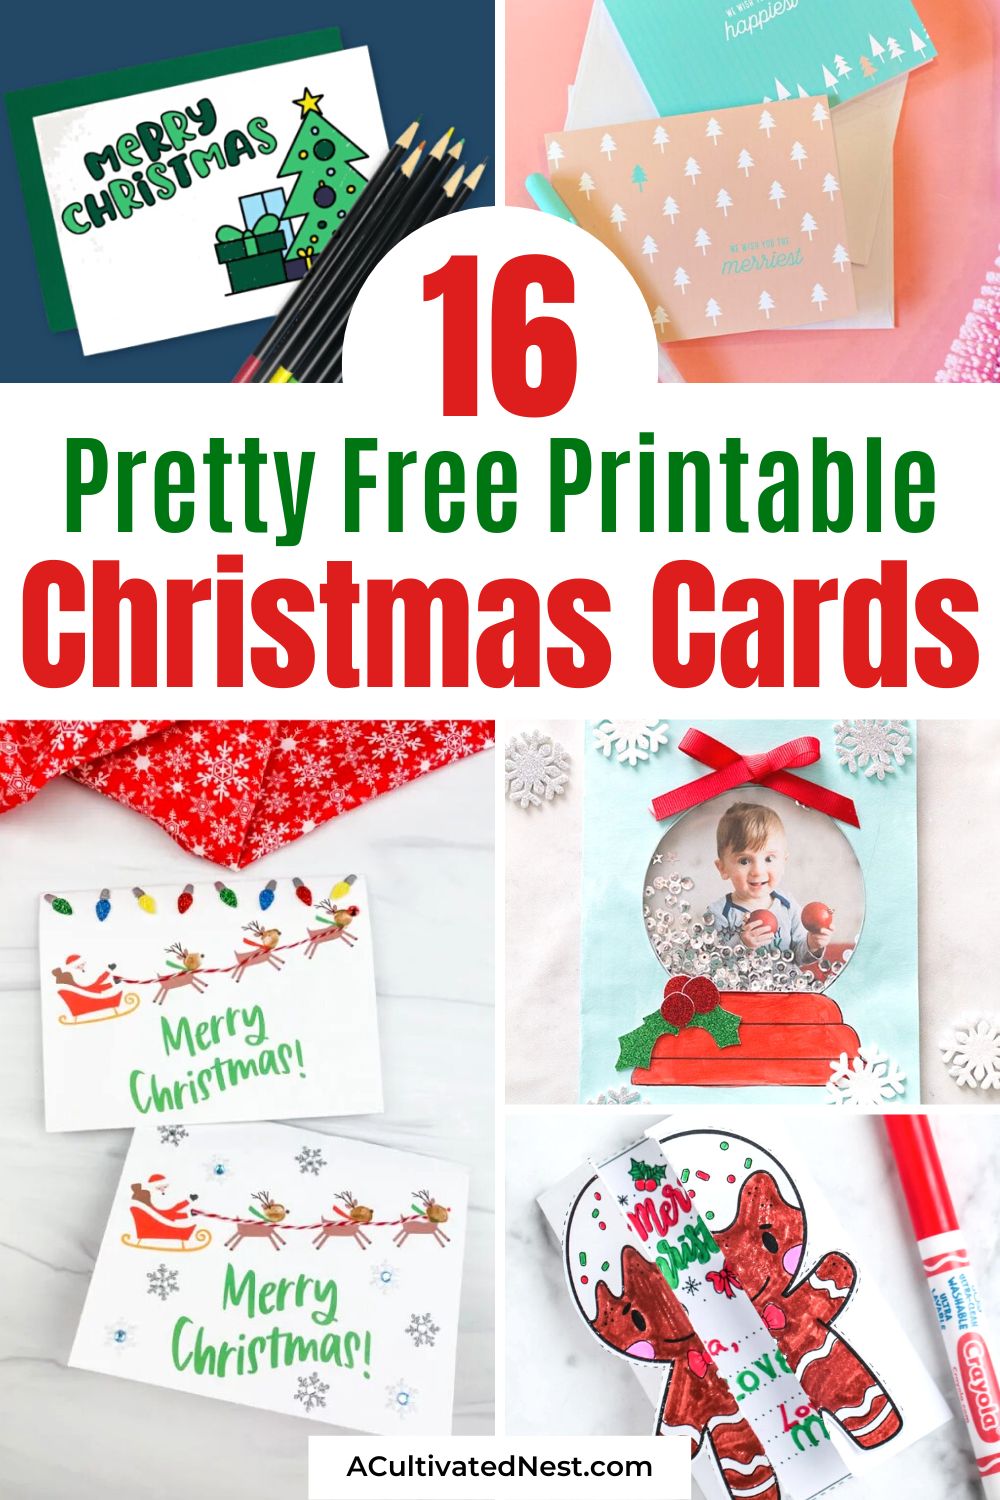 16 Beautiful Free Printable Christmas Cards- Embrace the spirit of giving with these stunning free printable Christmas cards! Perfect for last-minute greetings or DIY enthusiasts, these cards bring warmth and creativity to your holiday messages. Download, print, and share the joy of the season. | #Christmas #DIYHoliday #printables #freePrintables #ACultivatedNest